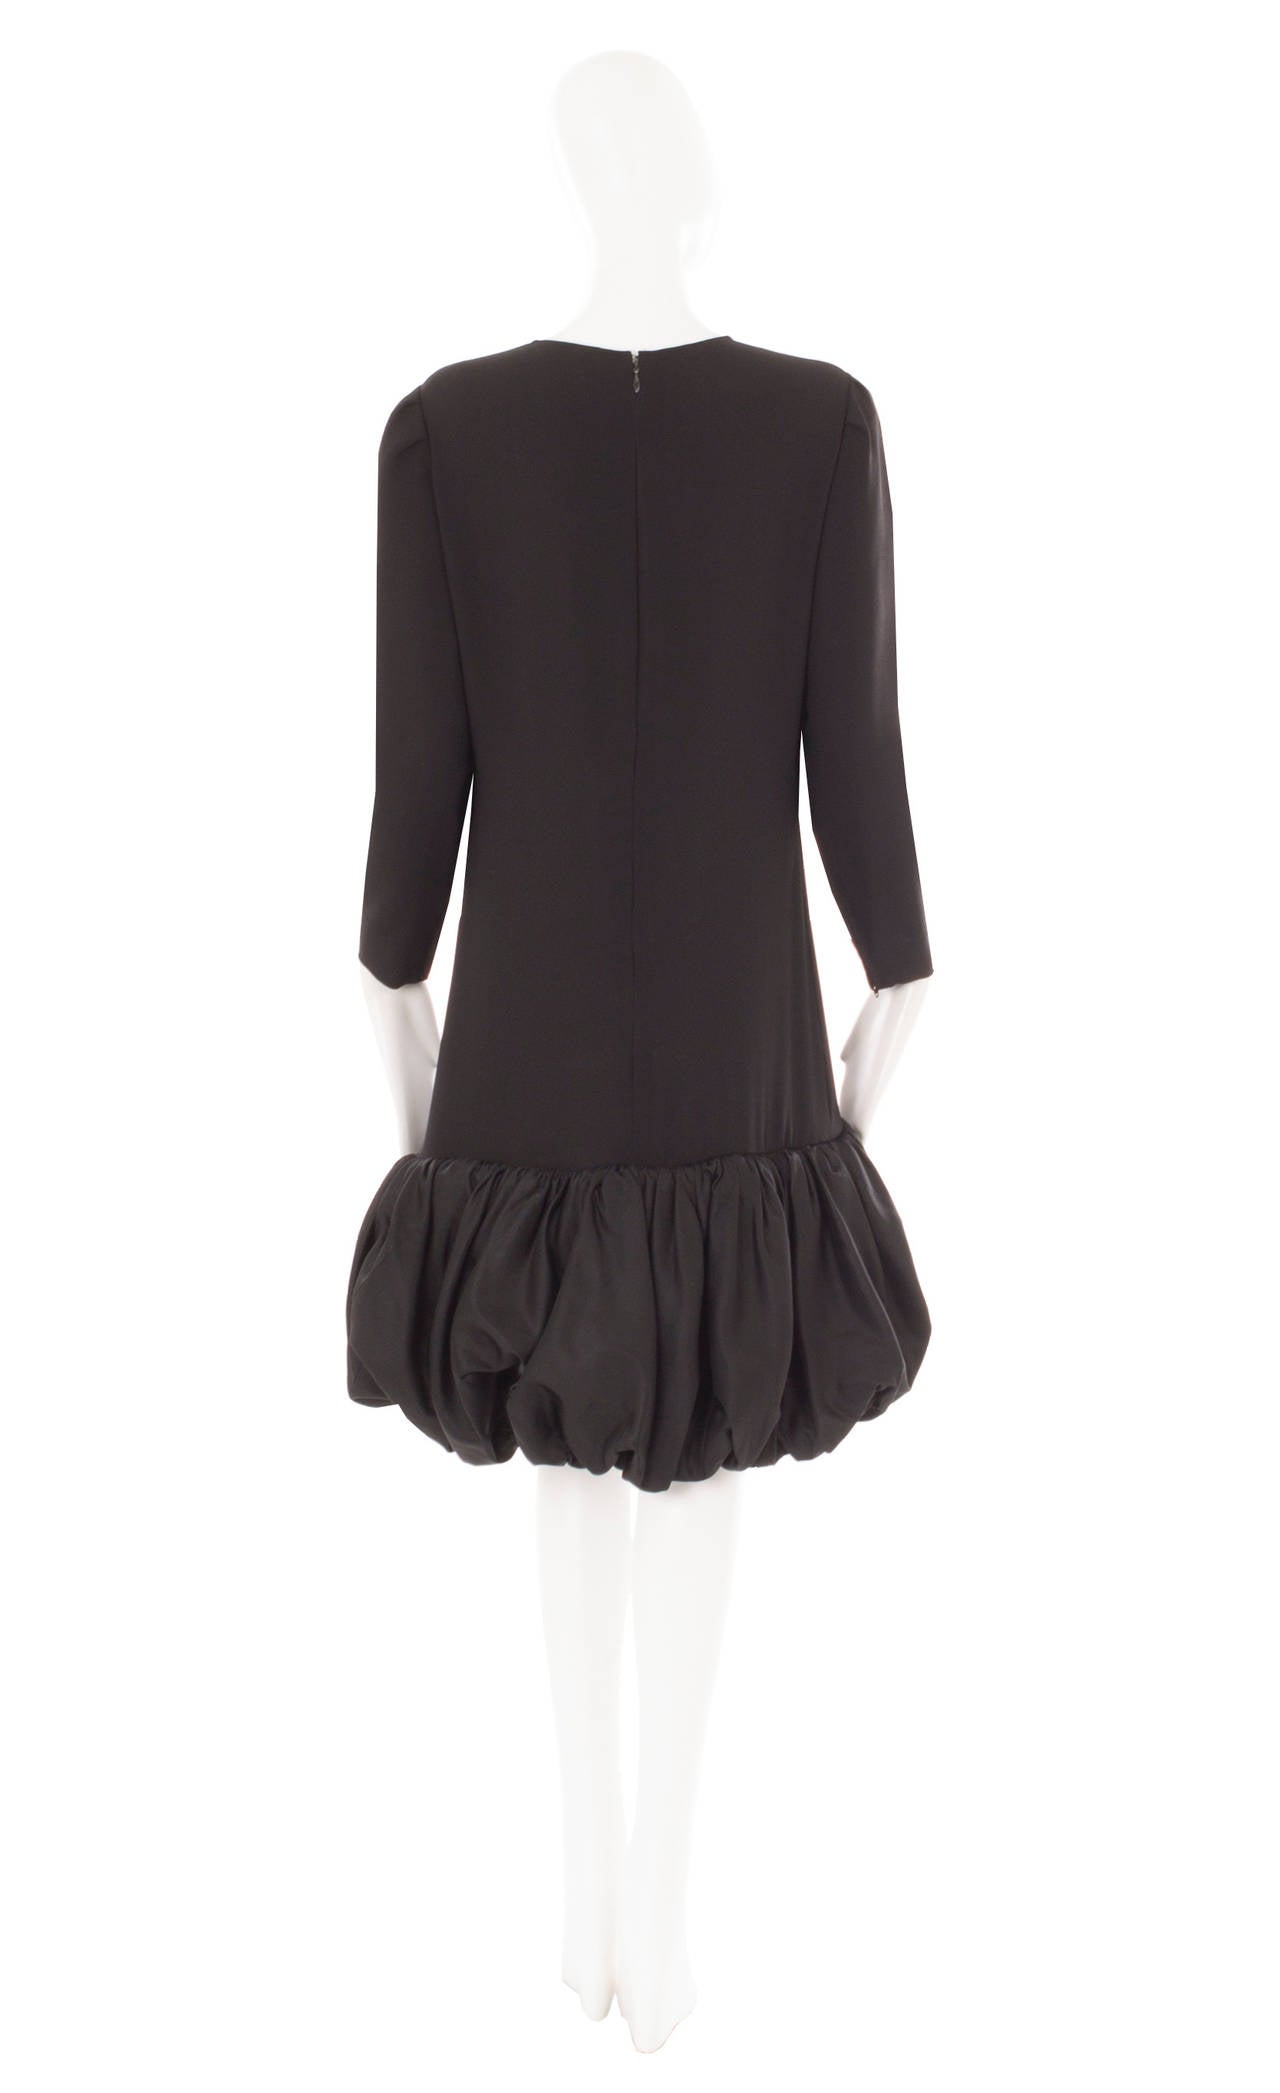 Bill Blass Black Wool Crepe Dress, Circa 1968 In Excellent Condition For Sale In London, GB